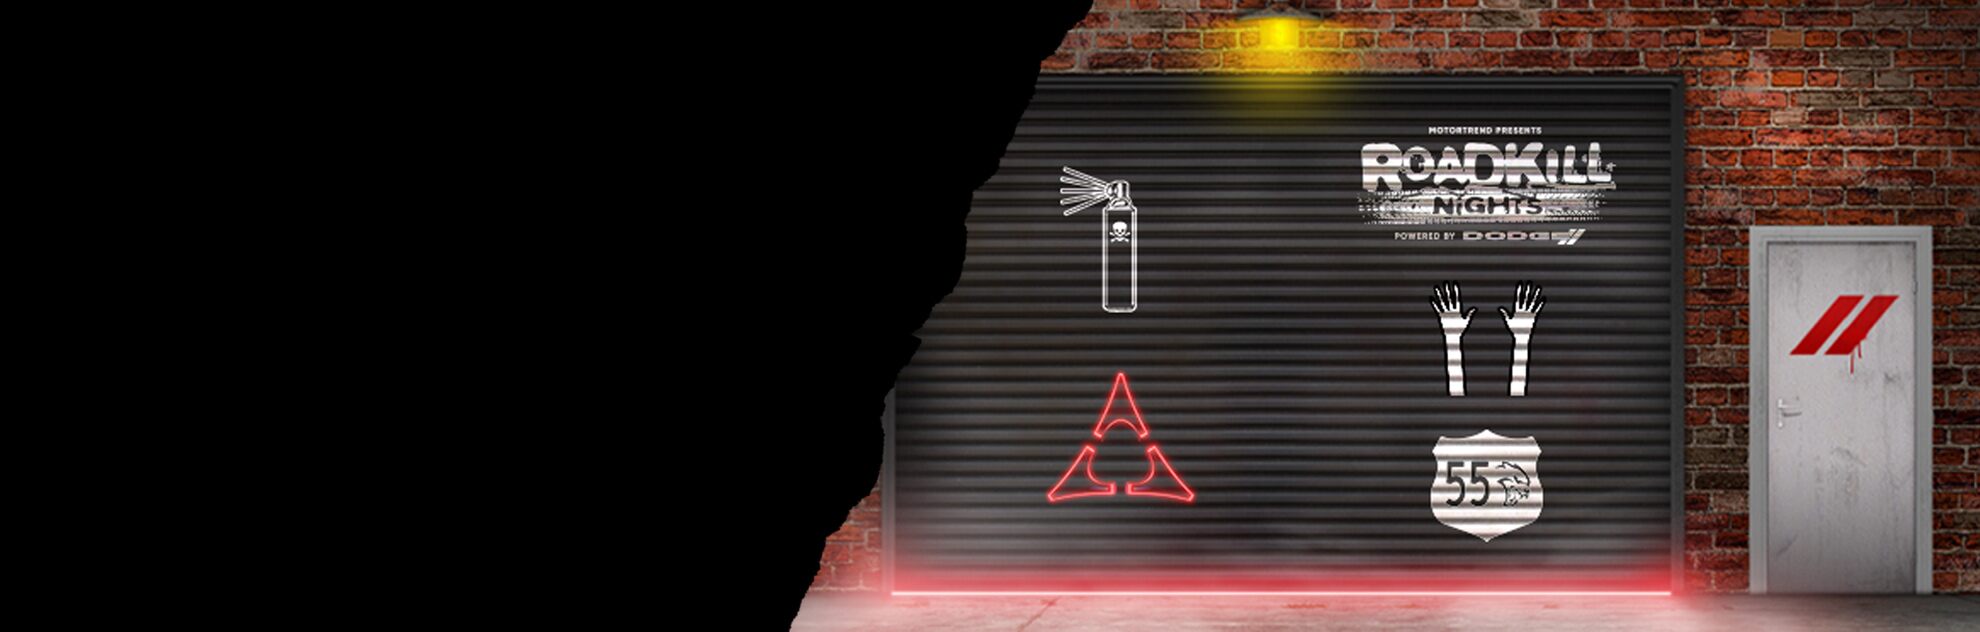 A black folding garage door on an old brick building at night, with red light emanating underneath. Graffiti is painted on the door: a white spray paint can with skull and crossbones, MotorTrend presents Roadkill Nights powered by Dodge in white, a set of white raised hands, the Fratzog logo in red and a white badge with 55 and the Hellcat head on it. The white dingy-looking door next to it has the Dodge red racing stripes spray painted on it.